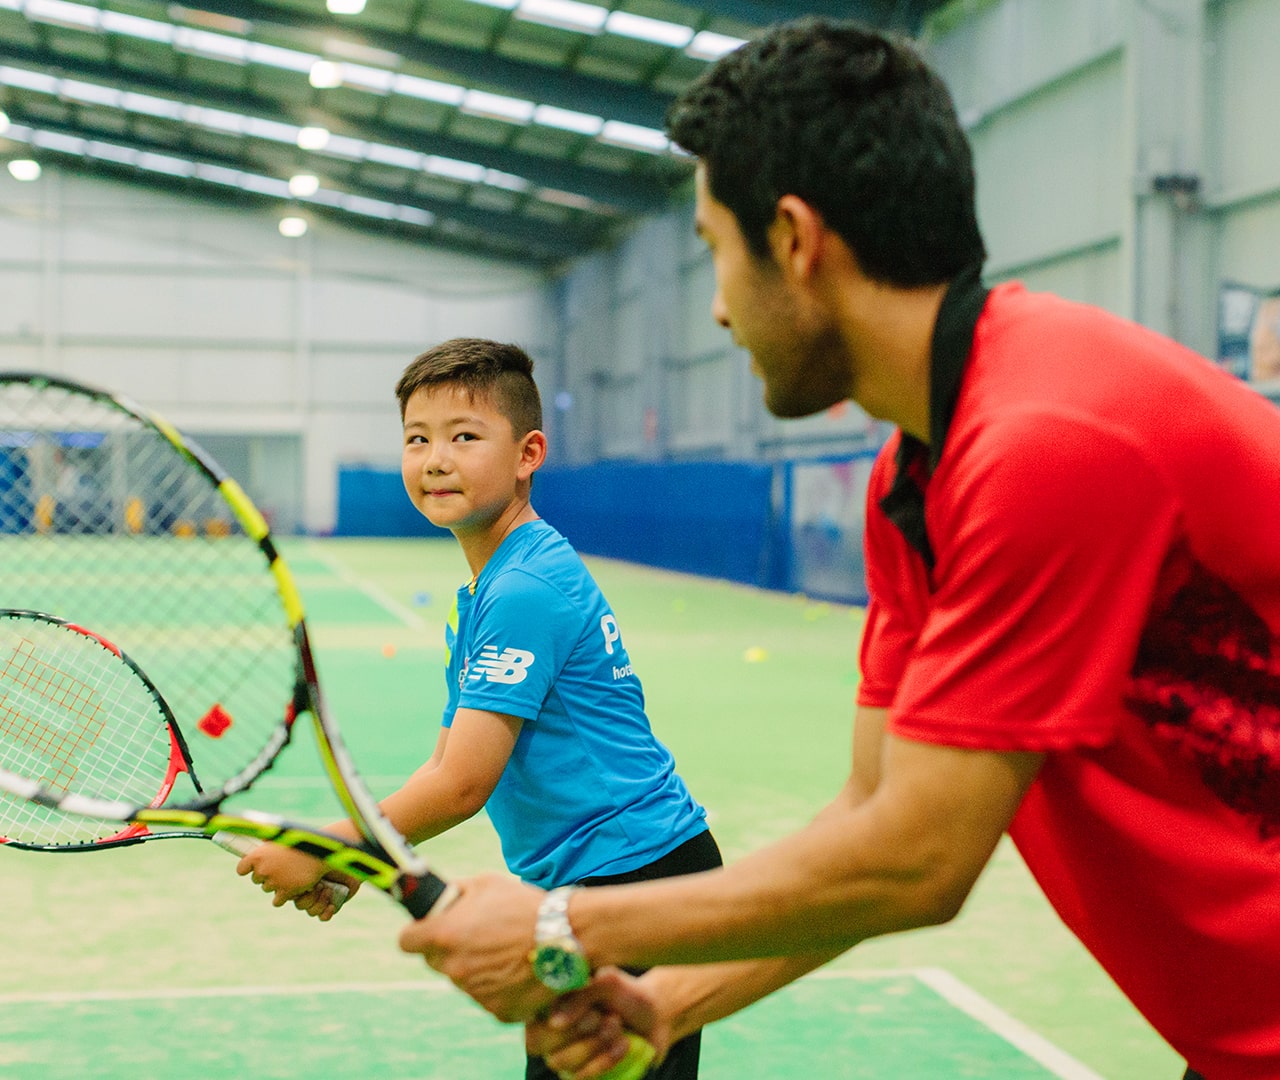 YMCA tennis coach working with young tennis player